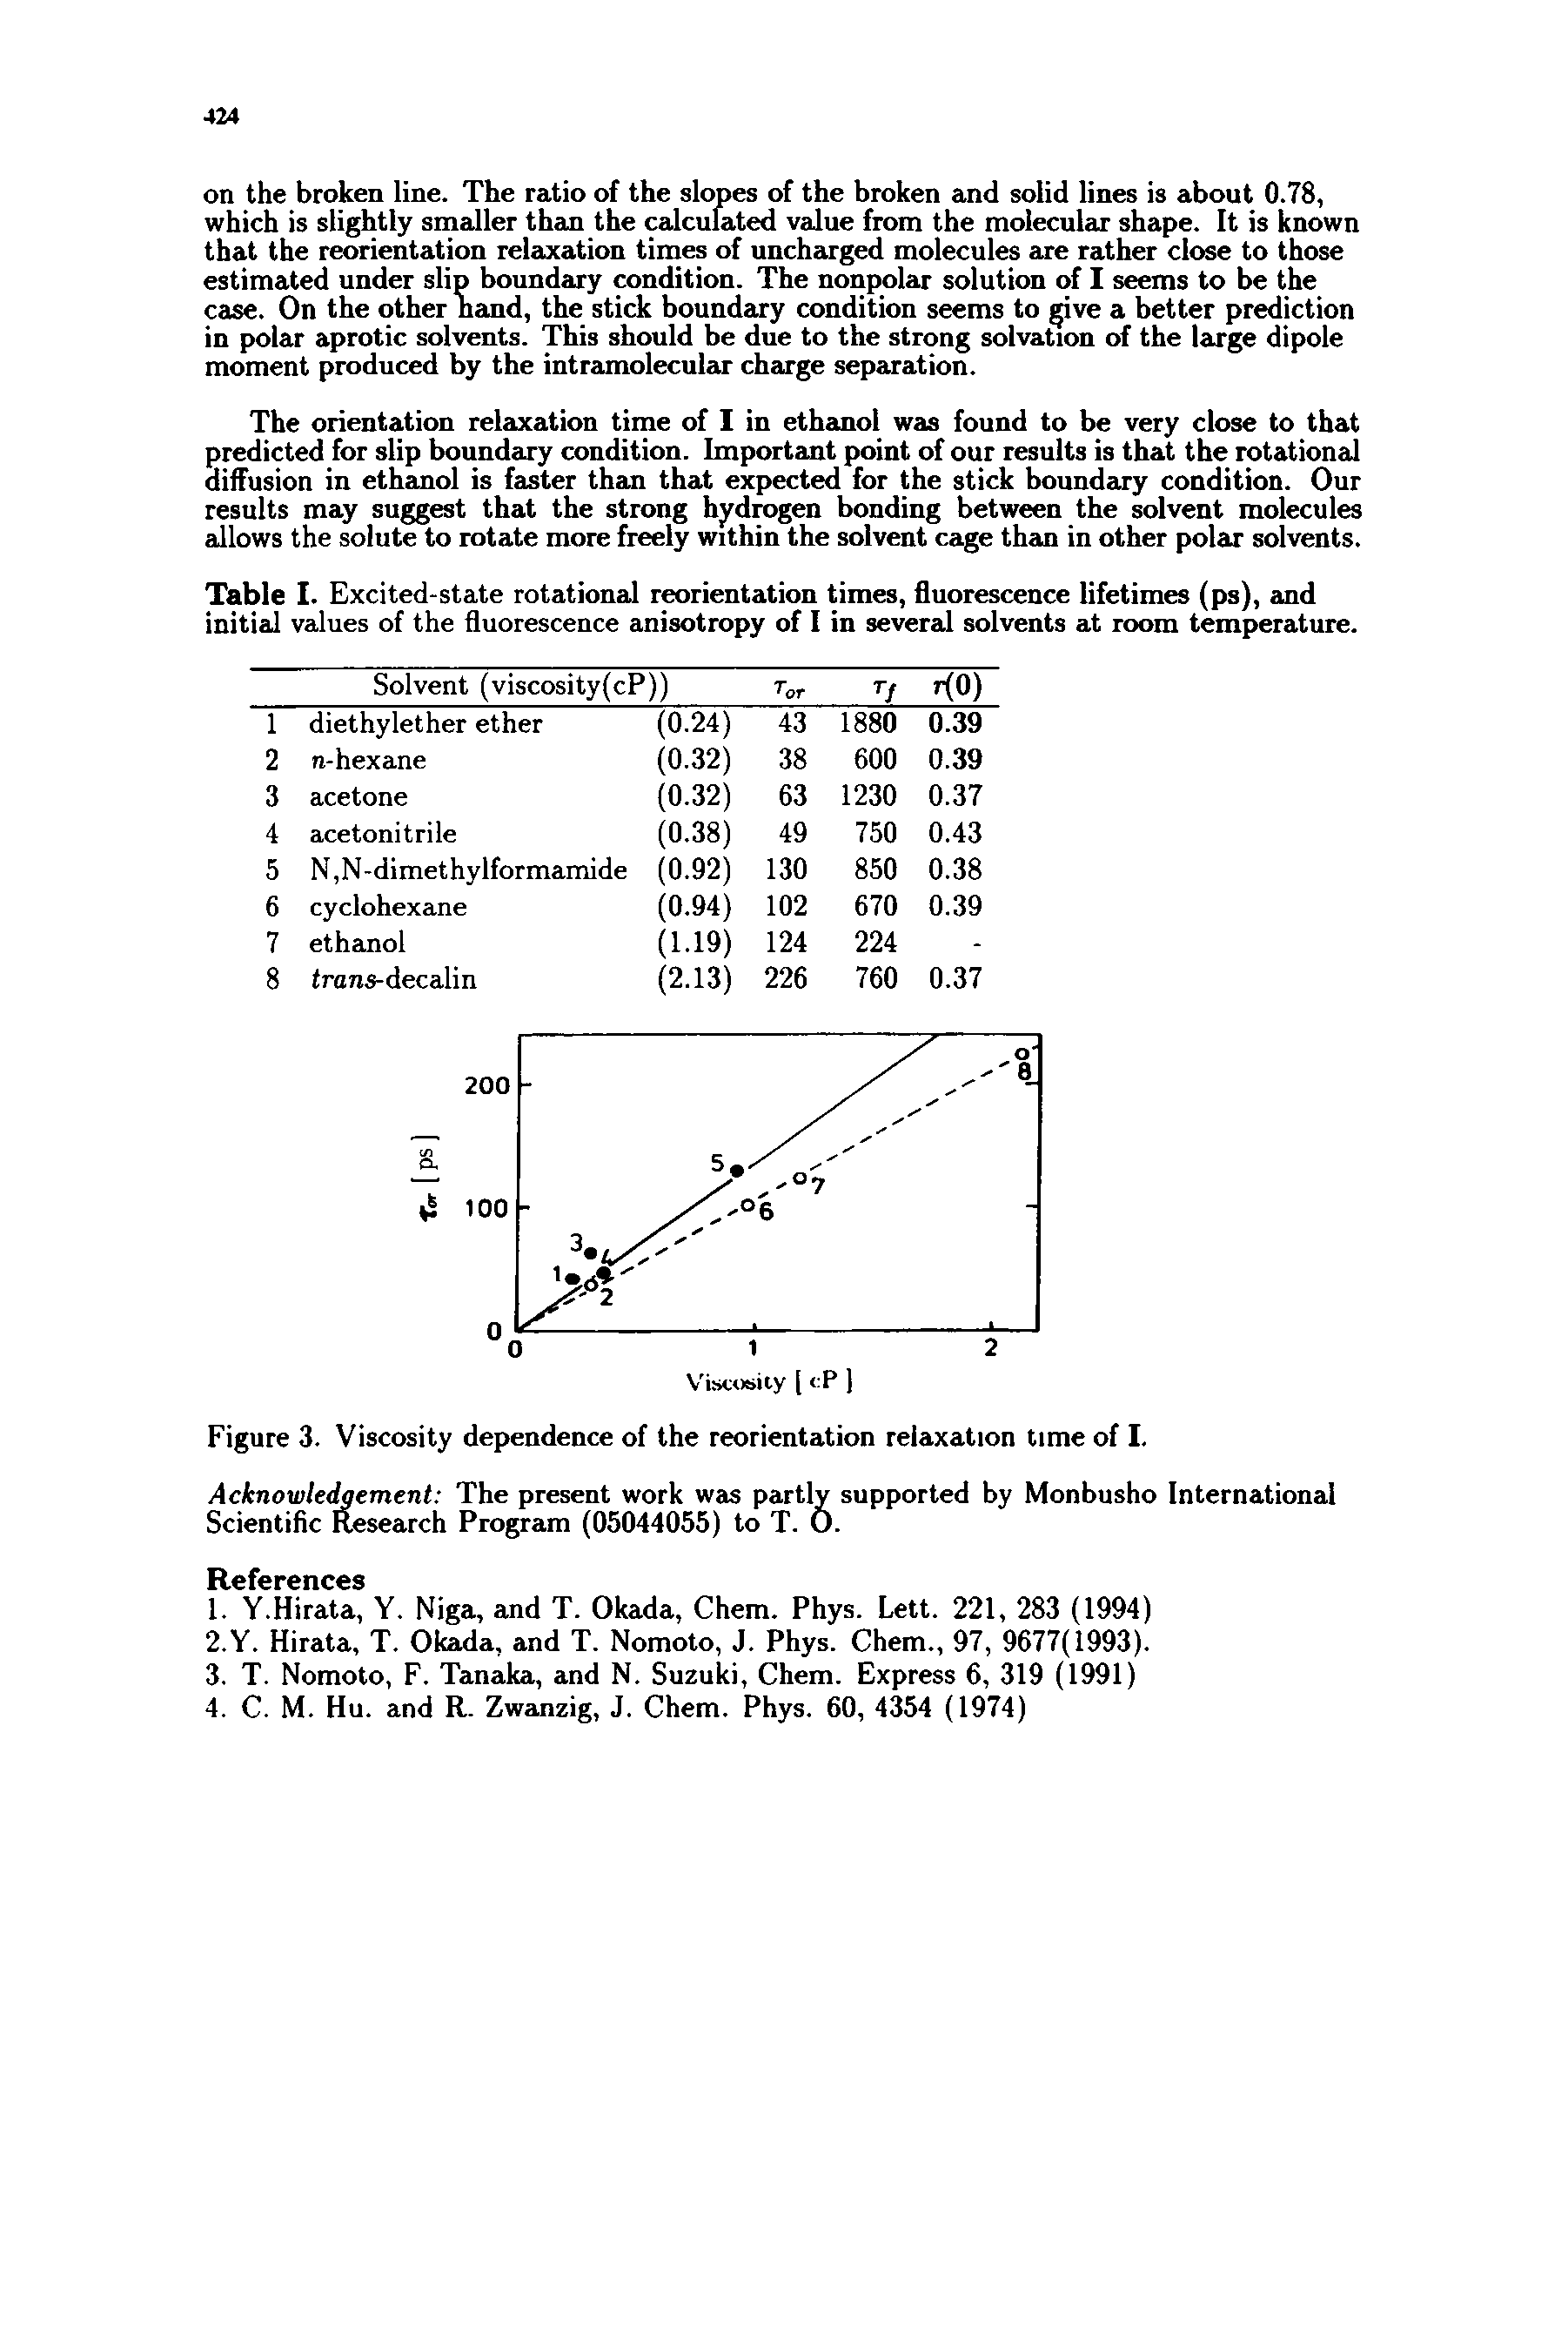 Table I. Excited-state rotational reorientation times, fluorescence lifetimes (ps), and initial values of the fluorescence anisotropy of I in several solvents at room temperature.